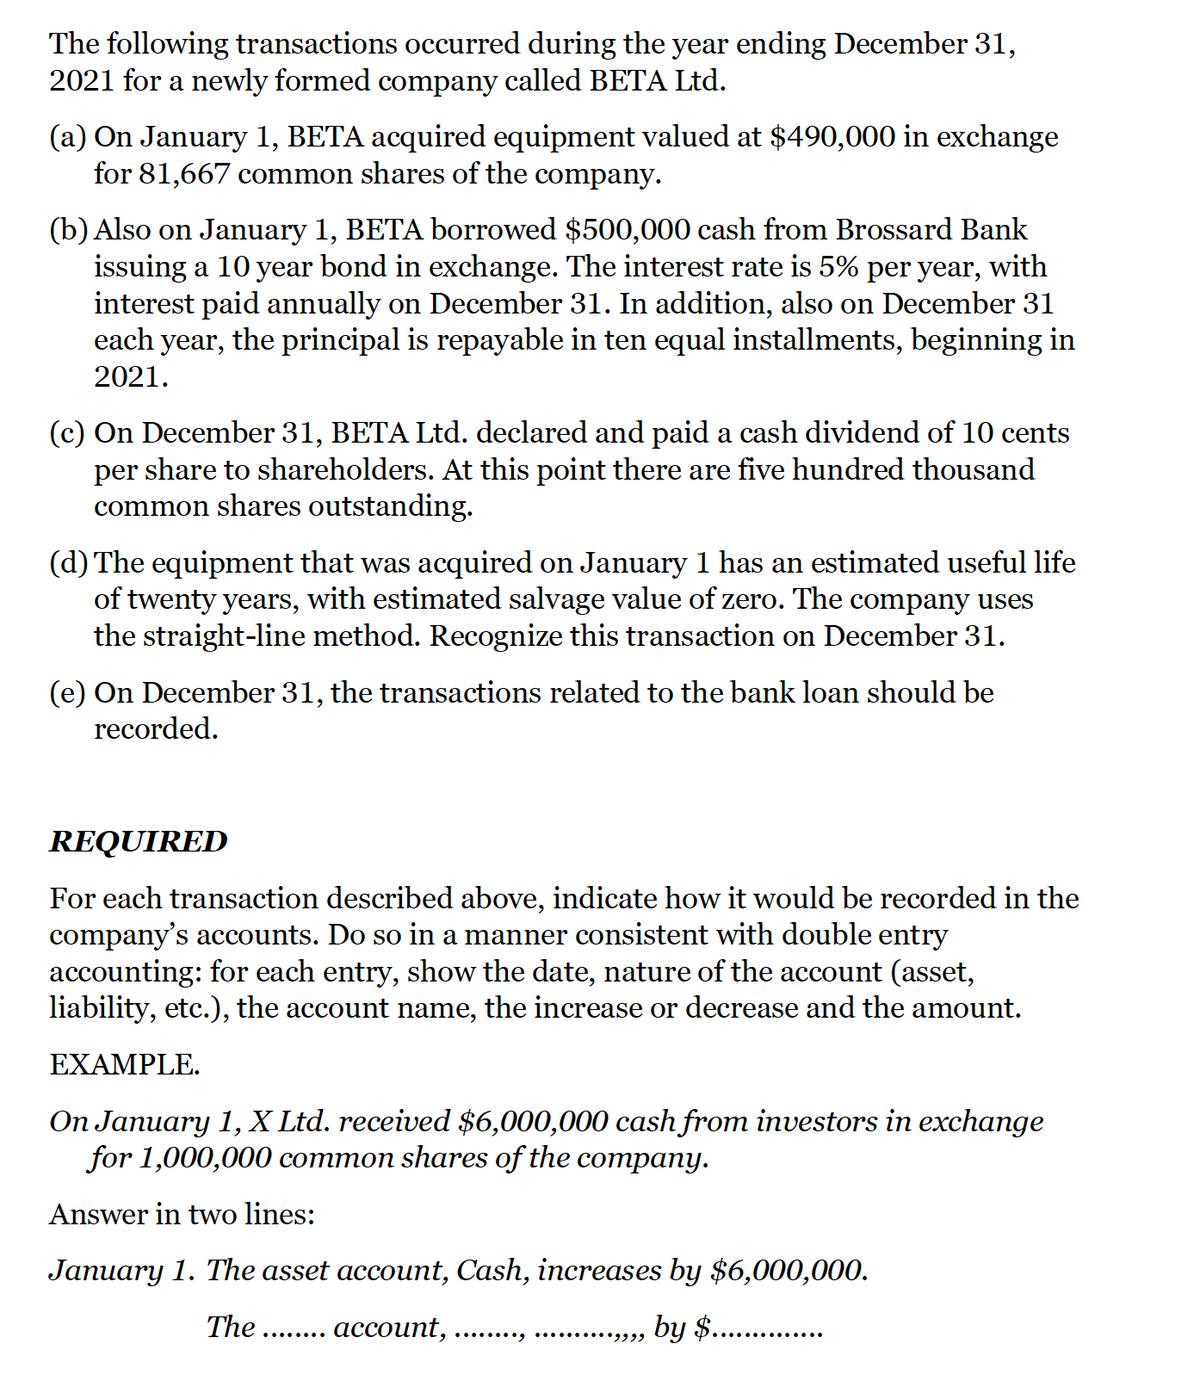 The following transactions occurred during the year ending December 31,
2021 for a newly formed company called BETA Ltd.
(a) On January 1, BETA acquired equipment valued at $490,000 in exchange
for 81,667 common shares of the company.
(b) Also on January 1, BETA borrowed $500,000 cash from Brossard Bank
issuing a 10 year bond in exchange. The interest rate is 5% per year, with
interest paid annually on December 31. In addition, also on December 31
each year, the principal is repayable in ten equal installments, beginning in
2021.
(c) On December 31, BETA Ltd. declared and paid a cash dividend of 10 cents
per share to shareholders. At this point there are five hundred thousand
common shares outstanding.
(d) The equipment that was acquired on January 1 has an estimated useful life
of twenty years, with estimated salvage value of zero. The company uses
the straight-line method. Recognize this transaction on December 31.
(e) On December 31, the transactions related to the bank loan should be
recorded.
REQUIRED
For each transaction described above, indicate how it would be recorded in the
company's accounts. Do so in a manner consistent with double entry
accounting: for each entry, show the date, nature of the account (asset,
liability, etc.), the account name, the increase or decrease and the amount.
EXAMPLE.
On January 1, X Ltd. received $6,000,000 cash from investors in exchange
for 1,000,000 common shares of the company.
Answer in two lines:
January 1. The asset account, Cash, increases by $6,000,000.
The
.... асcount,
by $.
